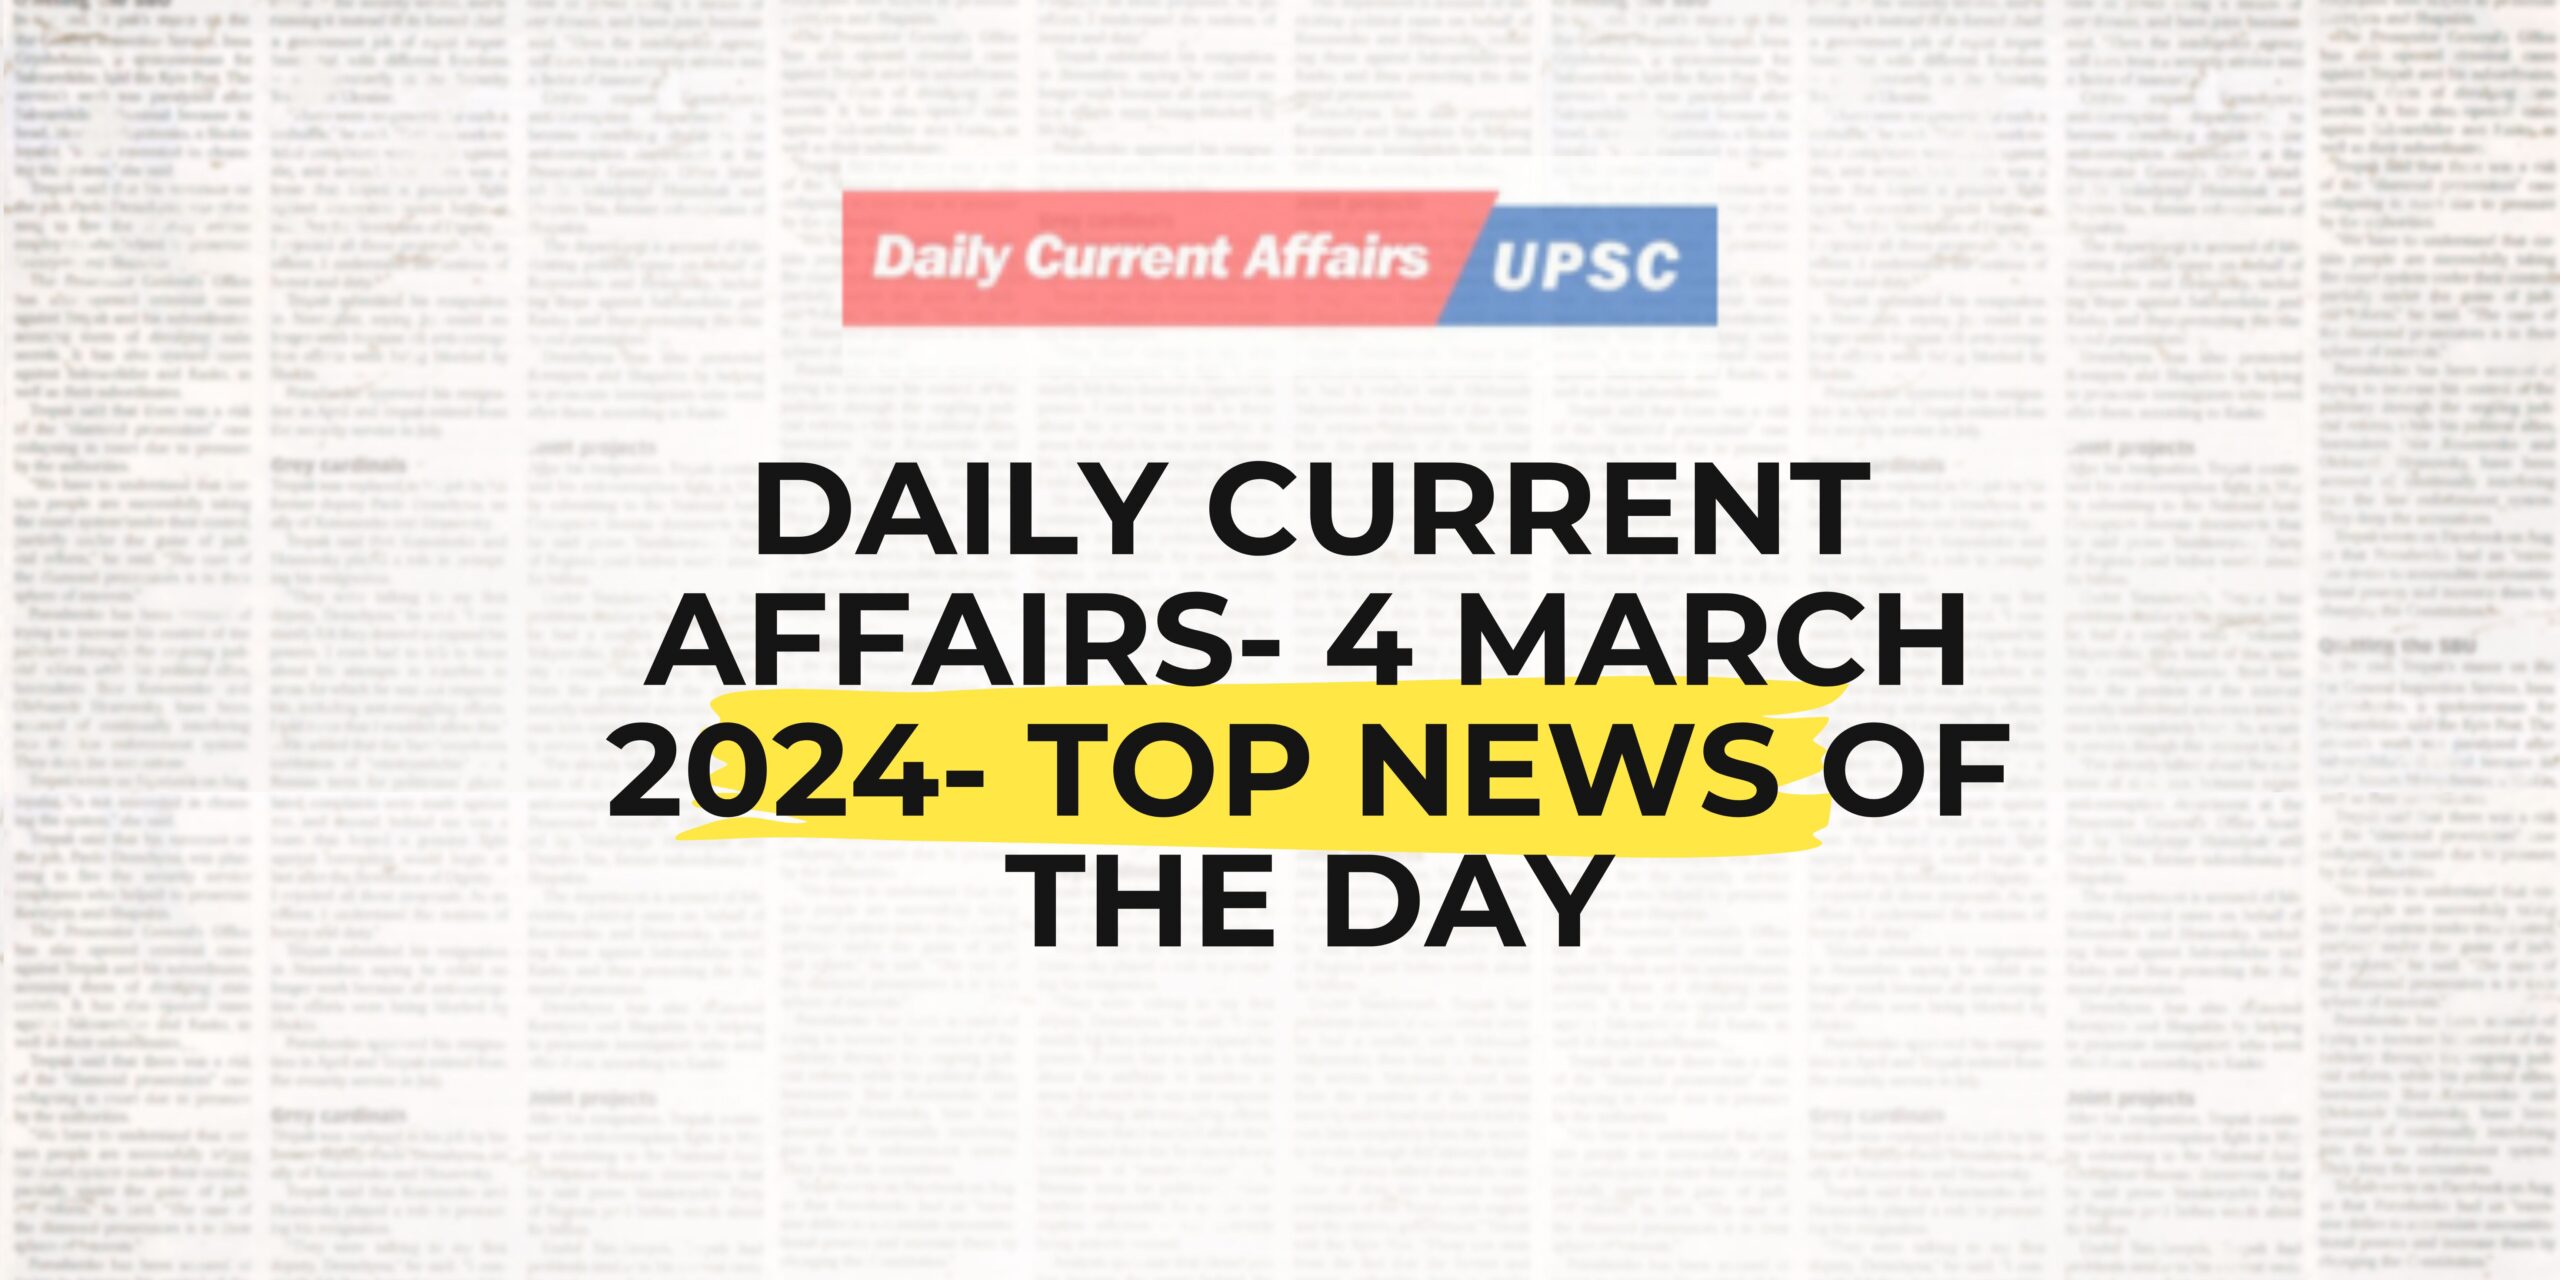 Daily Current Affairs 4 March 2024- Top News Of The Day